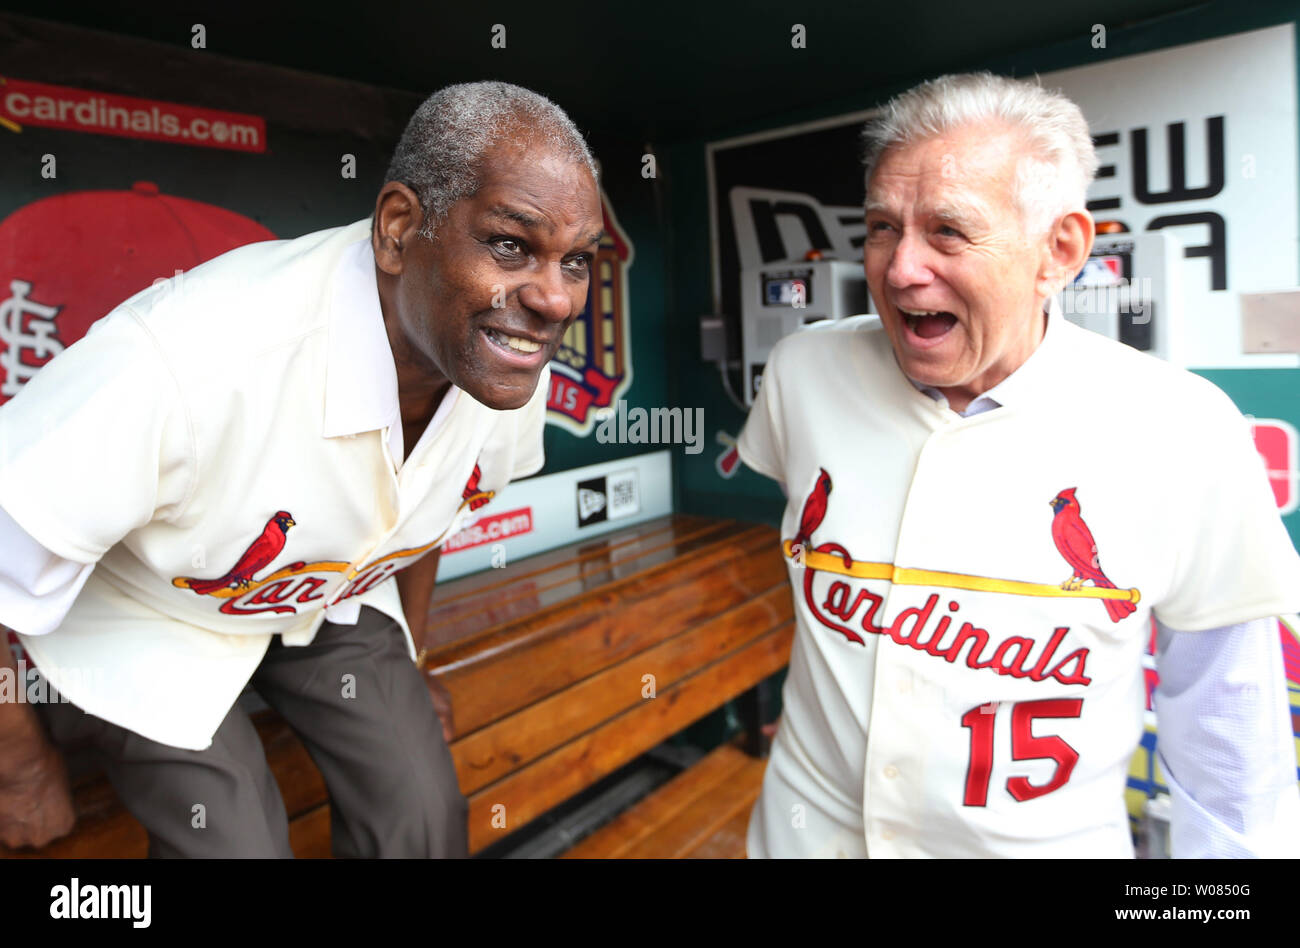 National Baseball Hall of Fame members former St. Louis Cardinals pitcher Bob  Gibson (L) and catcher Tim McCarver share a laugh before the 1968 team  reunion before the Philadelphia Phillies-St. Louis Cardinals